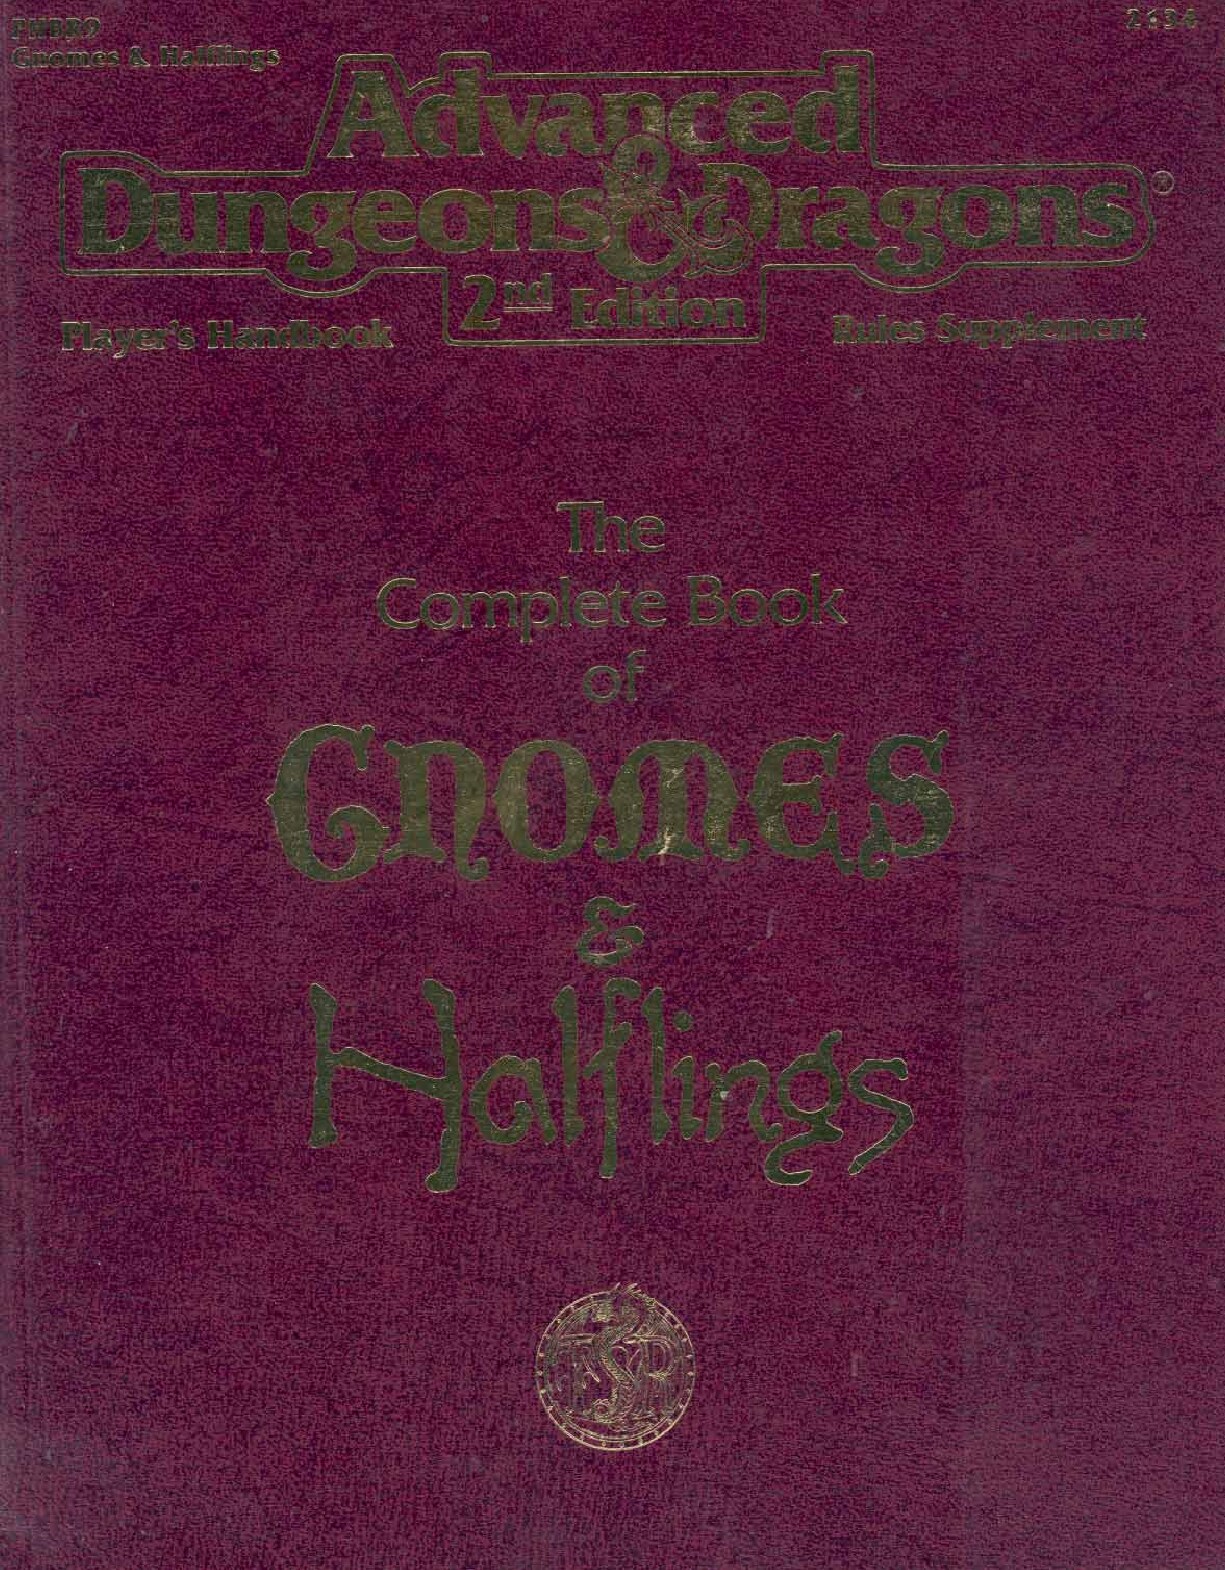 PHBR9 - The Complete Book Of Gnomes & Halflings (2134)